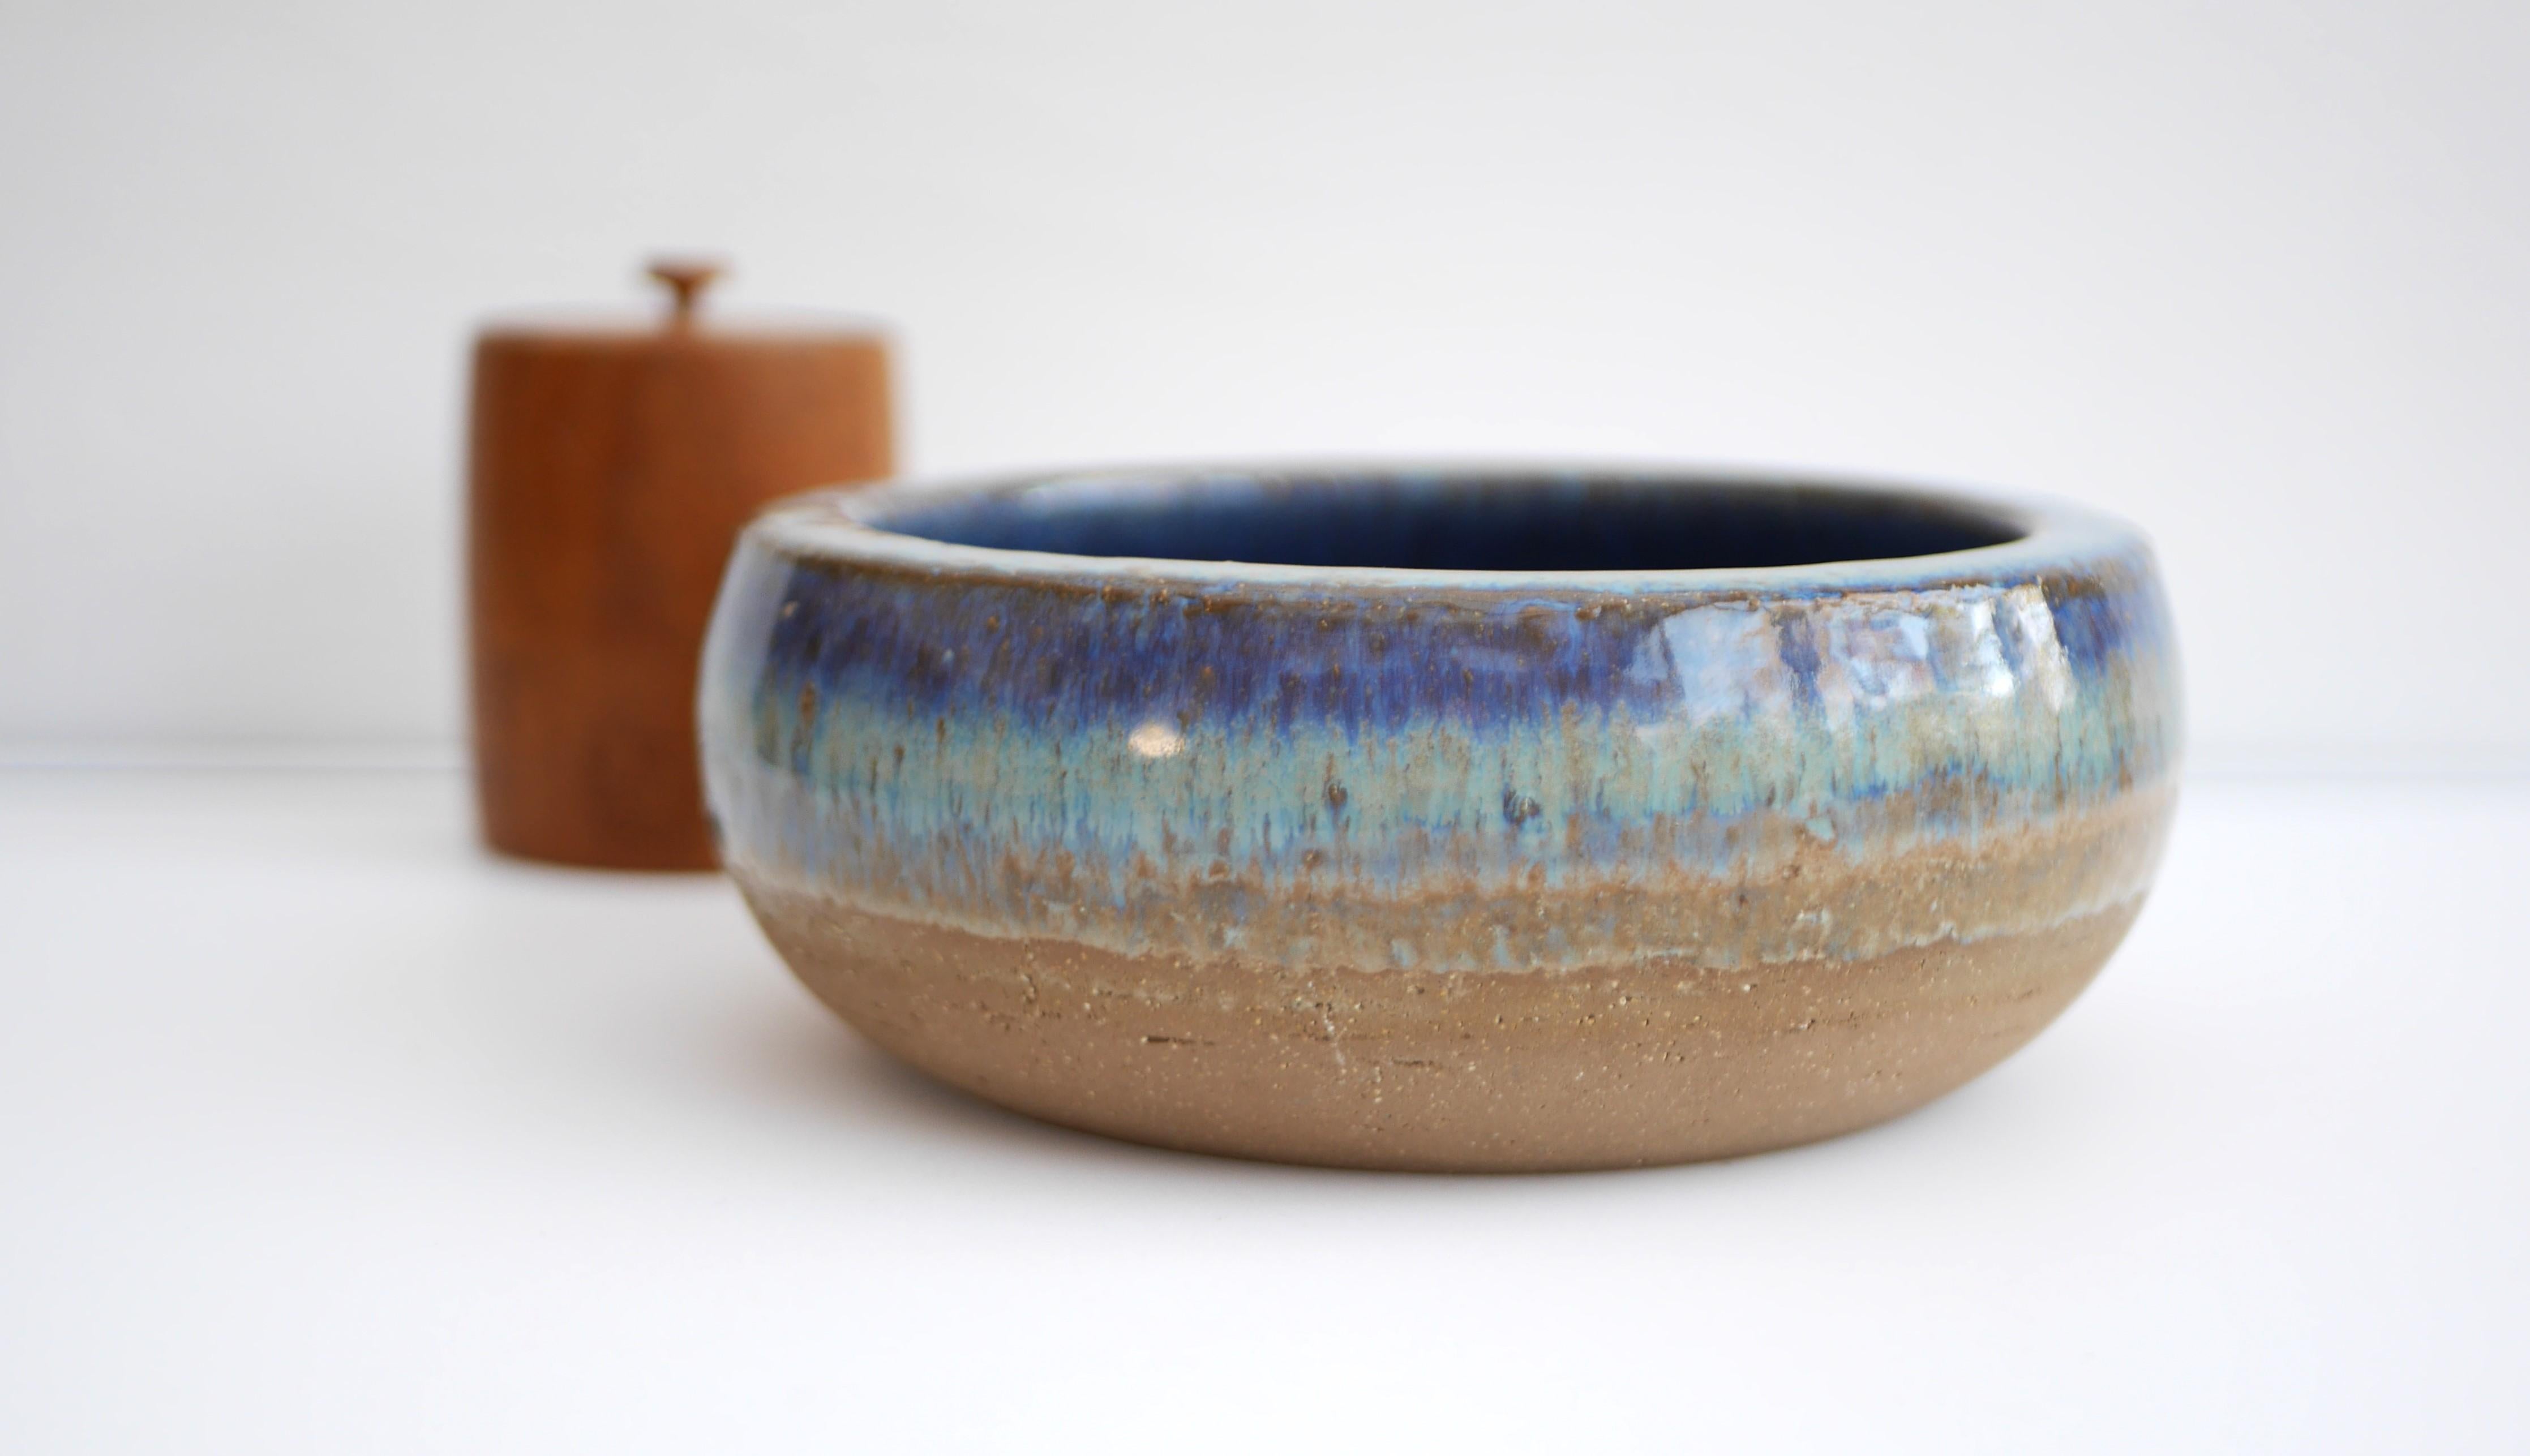 A beautiful stoneware vintage Bornholm pottery bowl from Denmark. Made by the talented Michael Andersen, this bowl is iconic and so typical for this company, especially when it comes to the glazing. The colors are a very nice various shades of blue